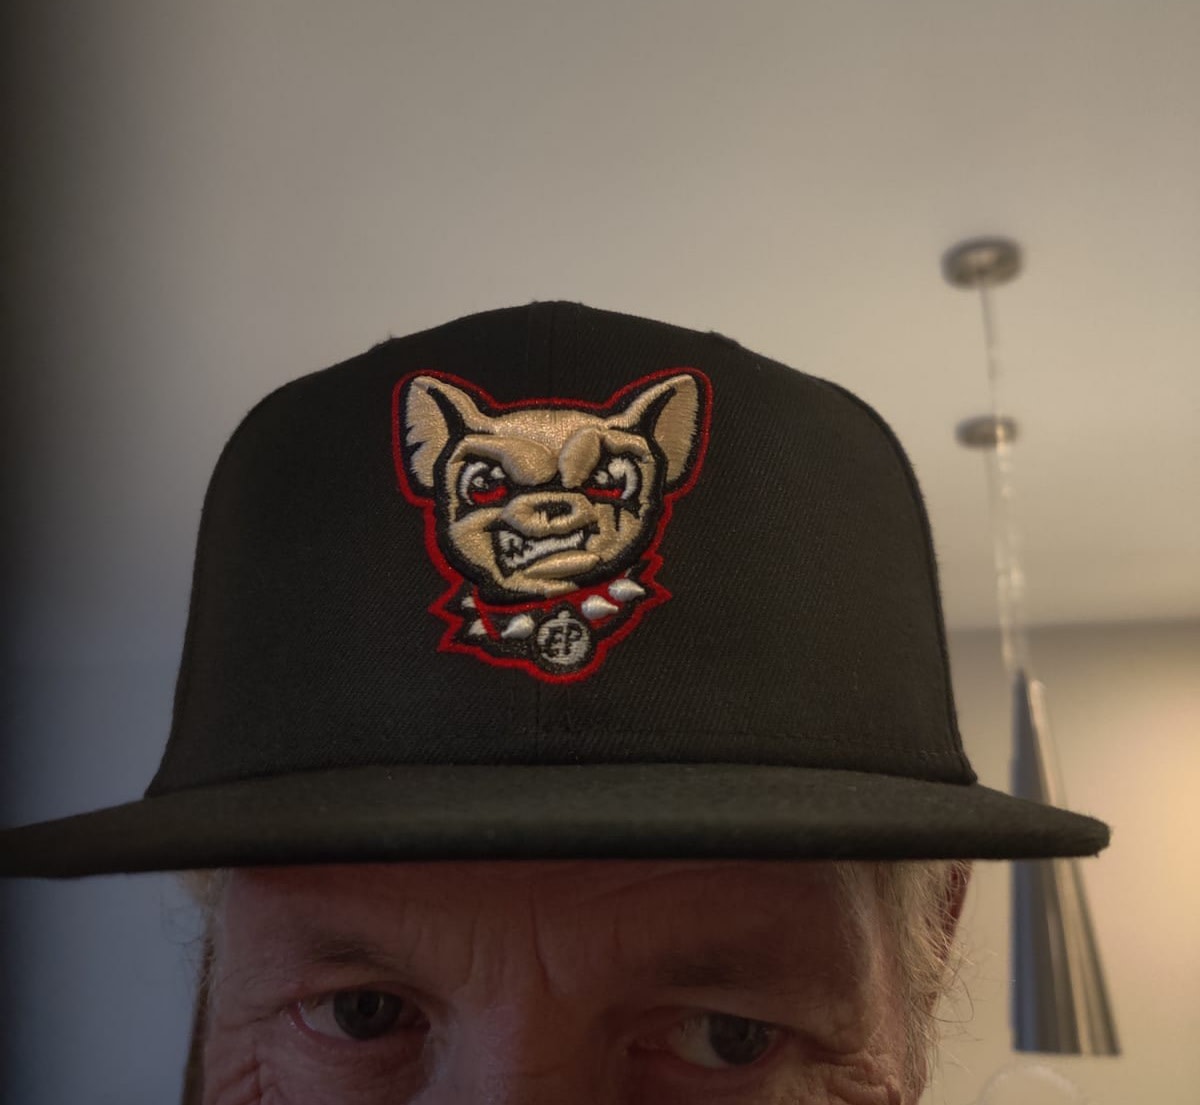 Your revered reviewer walks around wearing an El Paso Chihuahuas ballcap, giving a metaphorical middle finger to all of those high-falutin' "real" Texans.